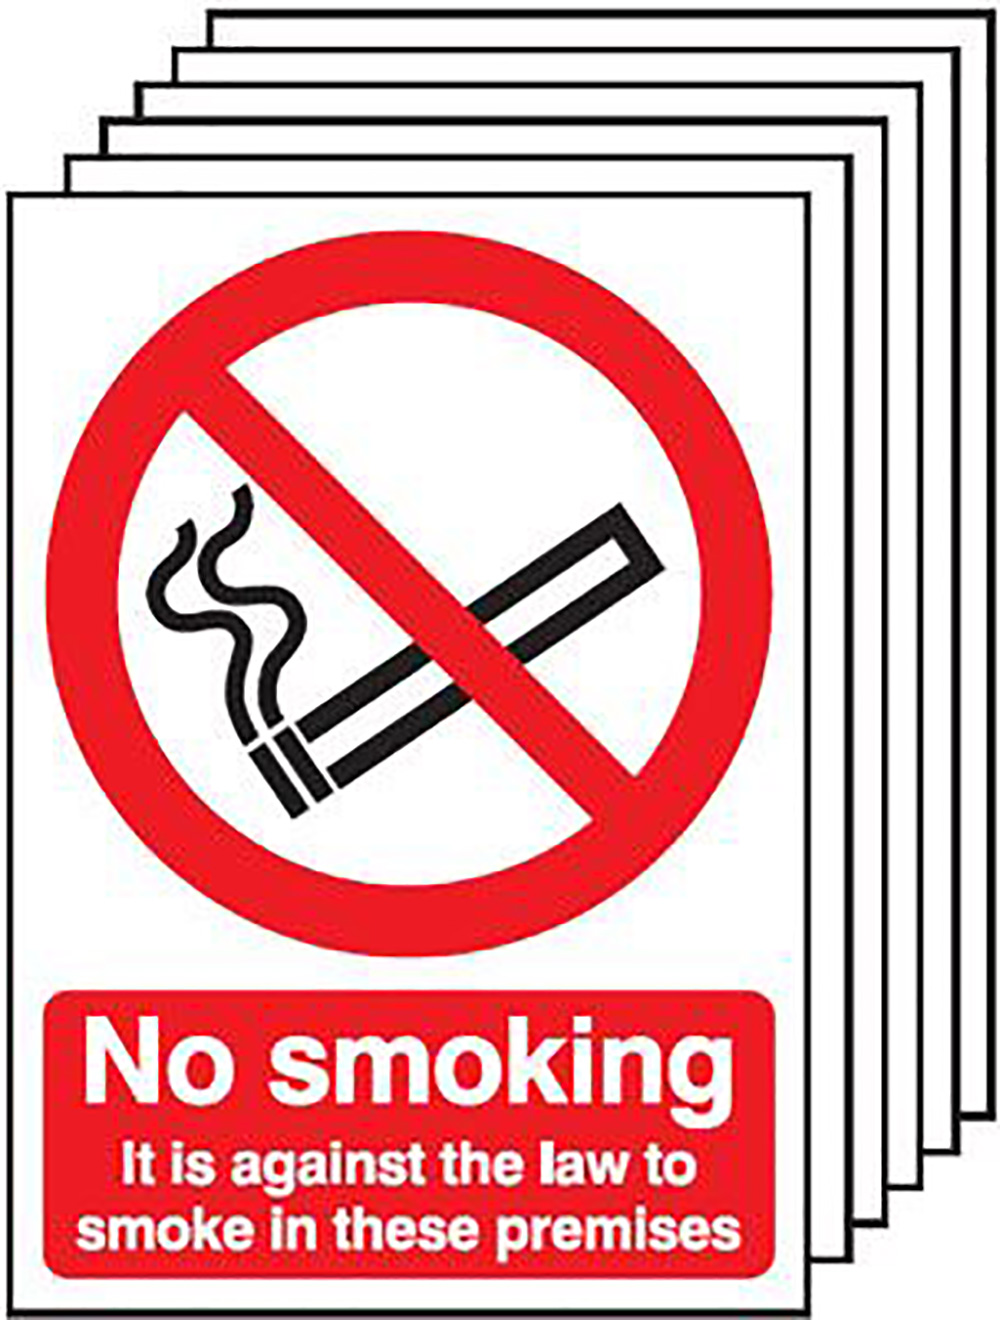 No Smoking It Is Against The Law   210x148mm 1.2mm Rigid Plastic Safety Sign Pack of 6 